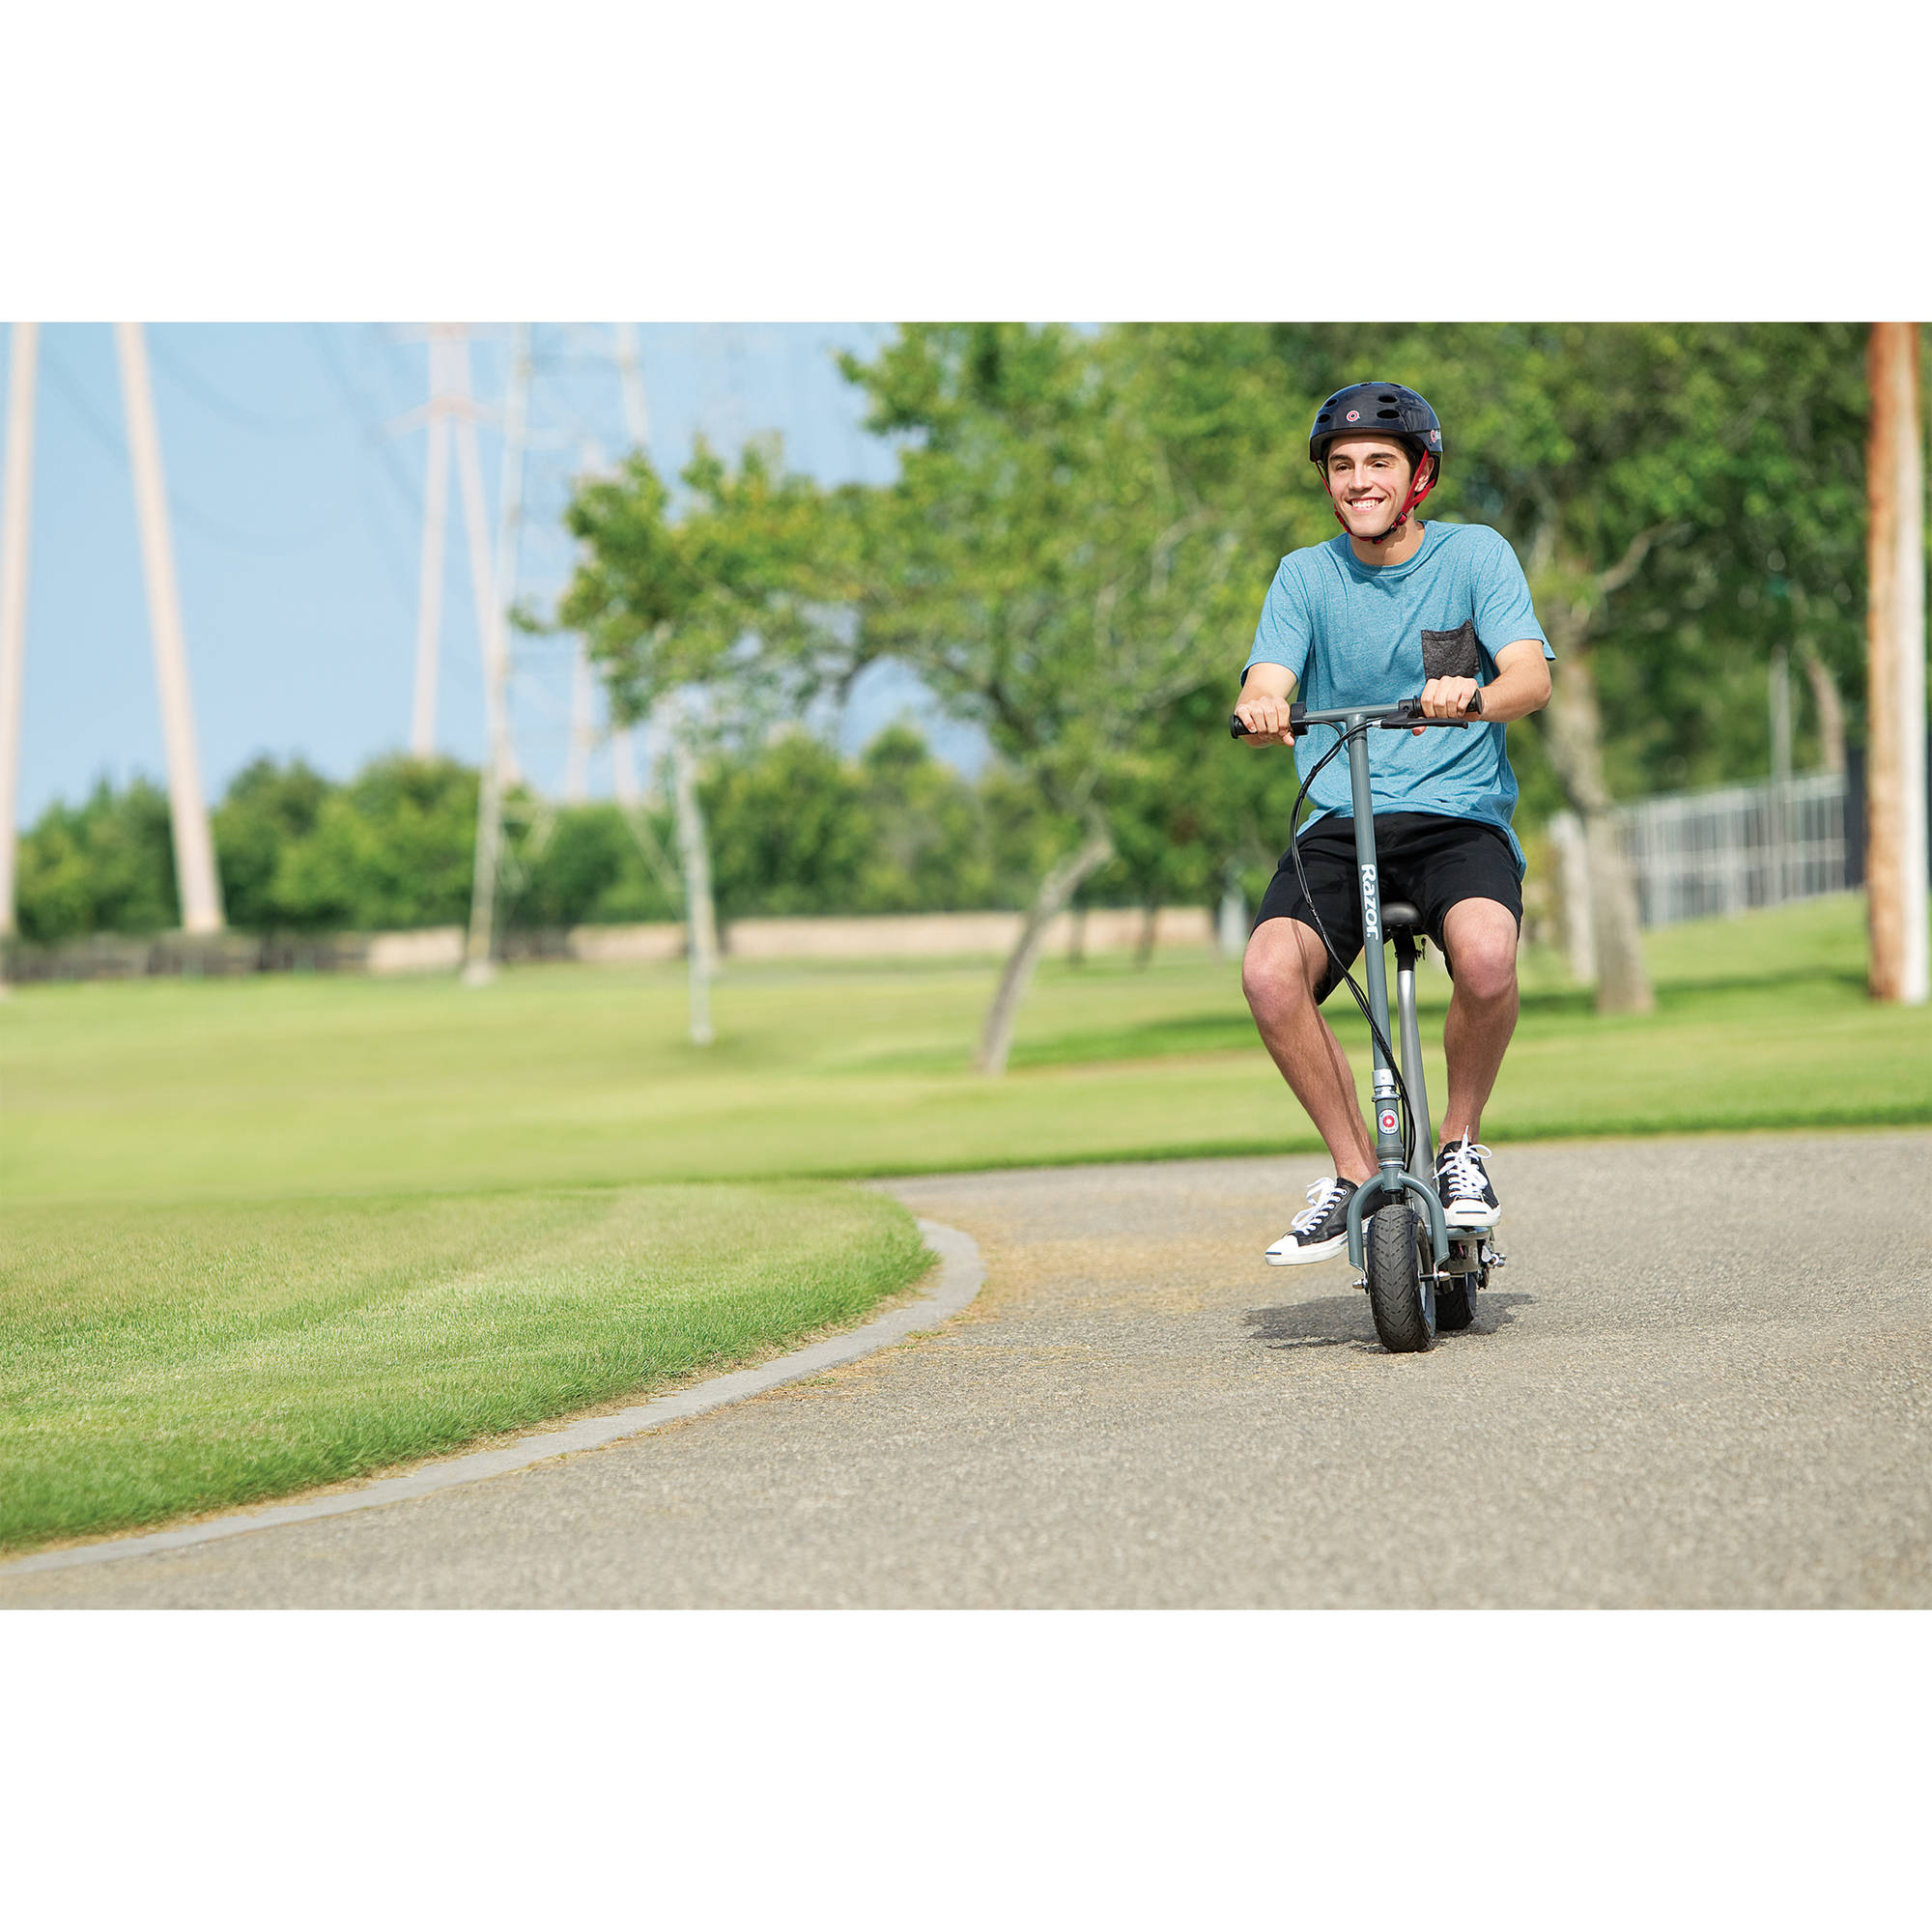 Razor E300S Seated Electric Scooter - Gray, for Ages 13+ and up to 220 lbs, 9" Pneumatic Front Tire, Up to 15 mph & up to 10-mile Range, 250W Chain Motor, 24V Sealed Lead-Acid Battery - image 3 of 12